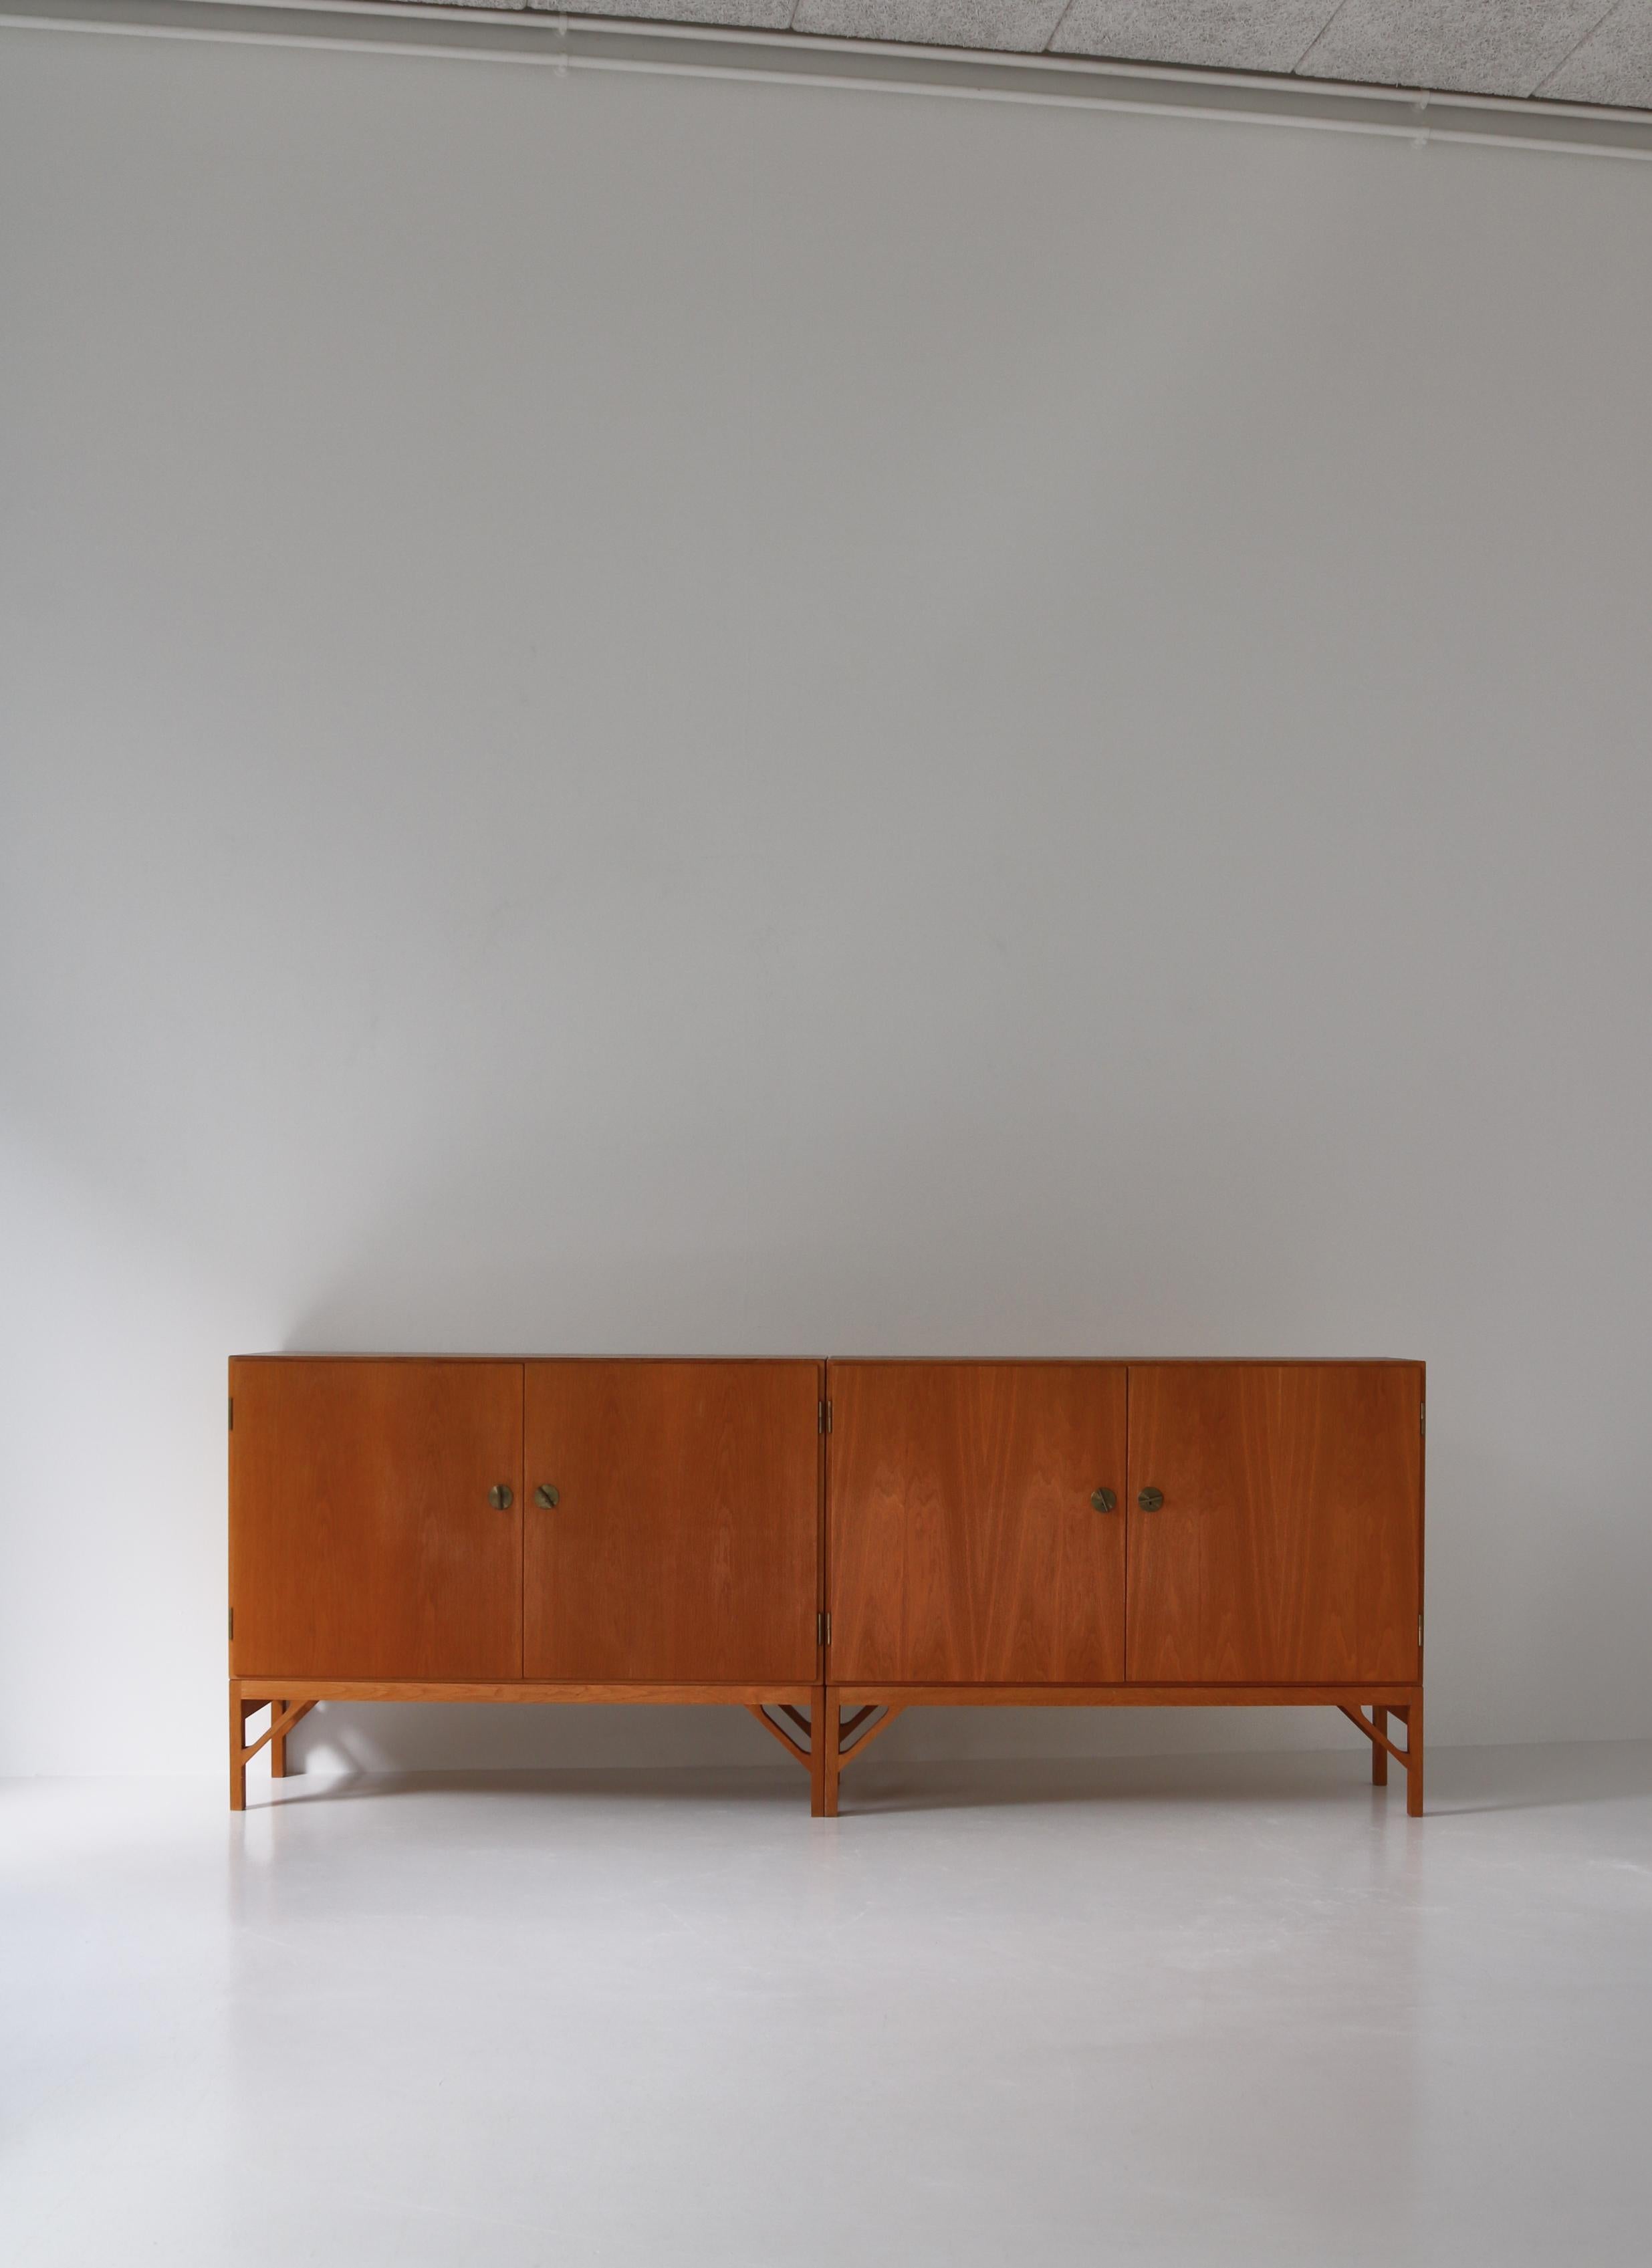 A wonderful pair of 'China' cabinets all in oak with maple interior. Beautiful keys and handles in brass. Designed by Børge Mogensen in 1960 and produced by cabinetmaker C.M. Madsens for FDB Møbler, Denmark. Both cabinets are beautifully patinated